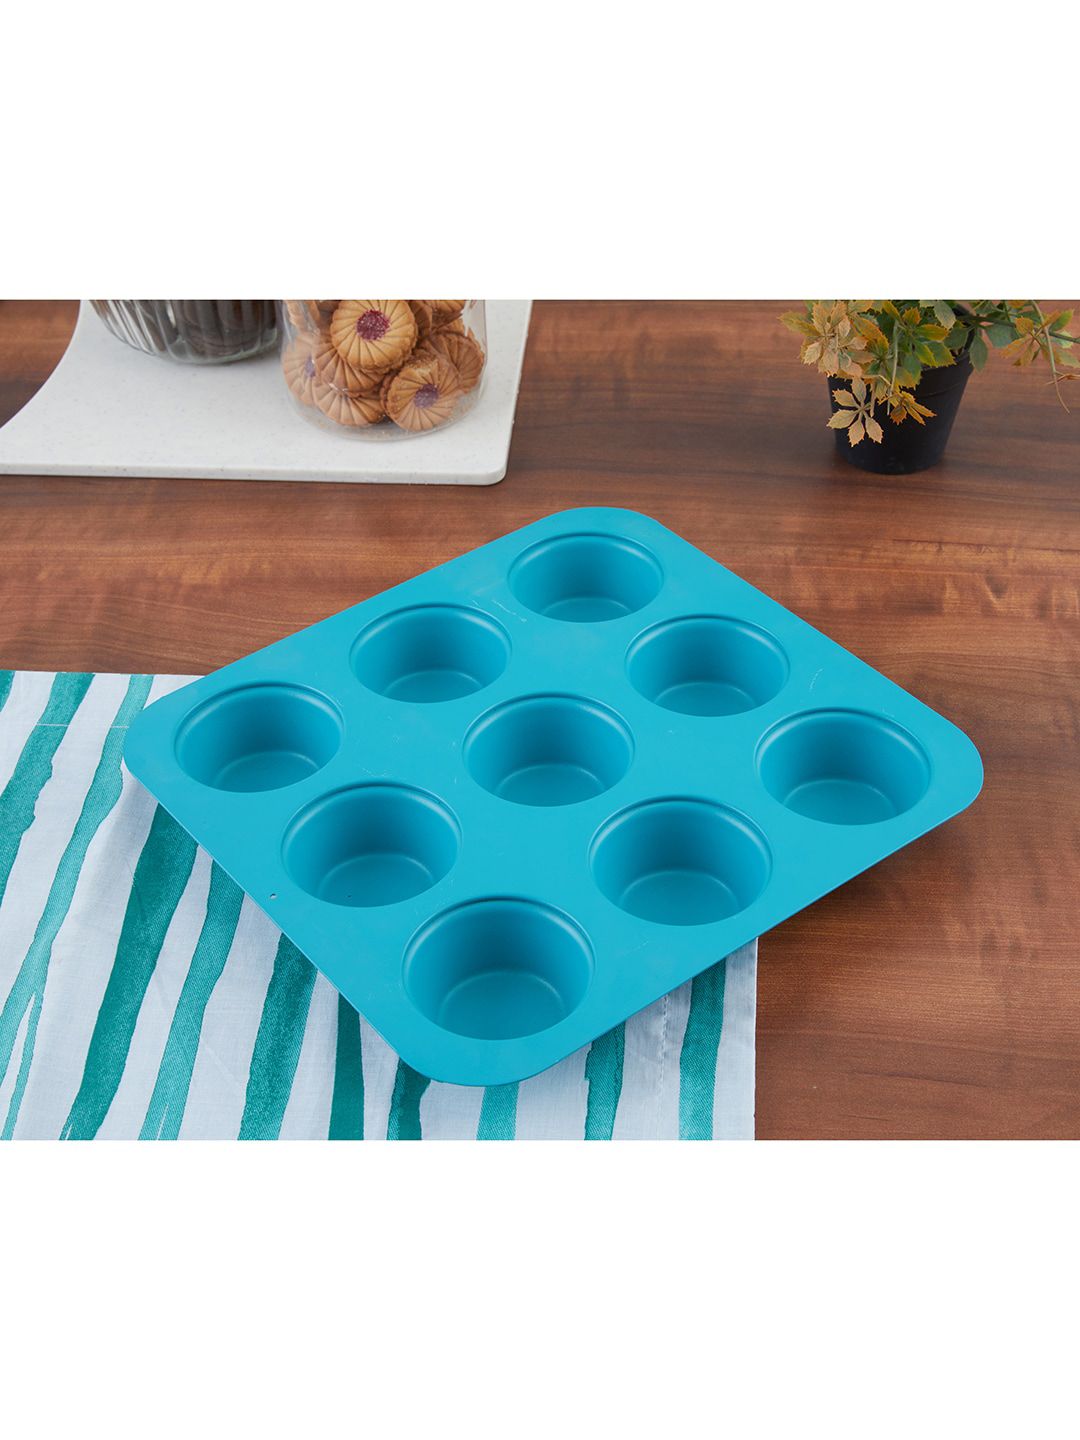 HomeTown Teal Blue 9-Cavity Aluminium Muffin Tray Bakeware Price in India